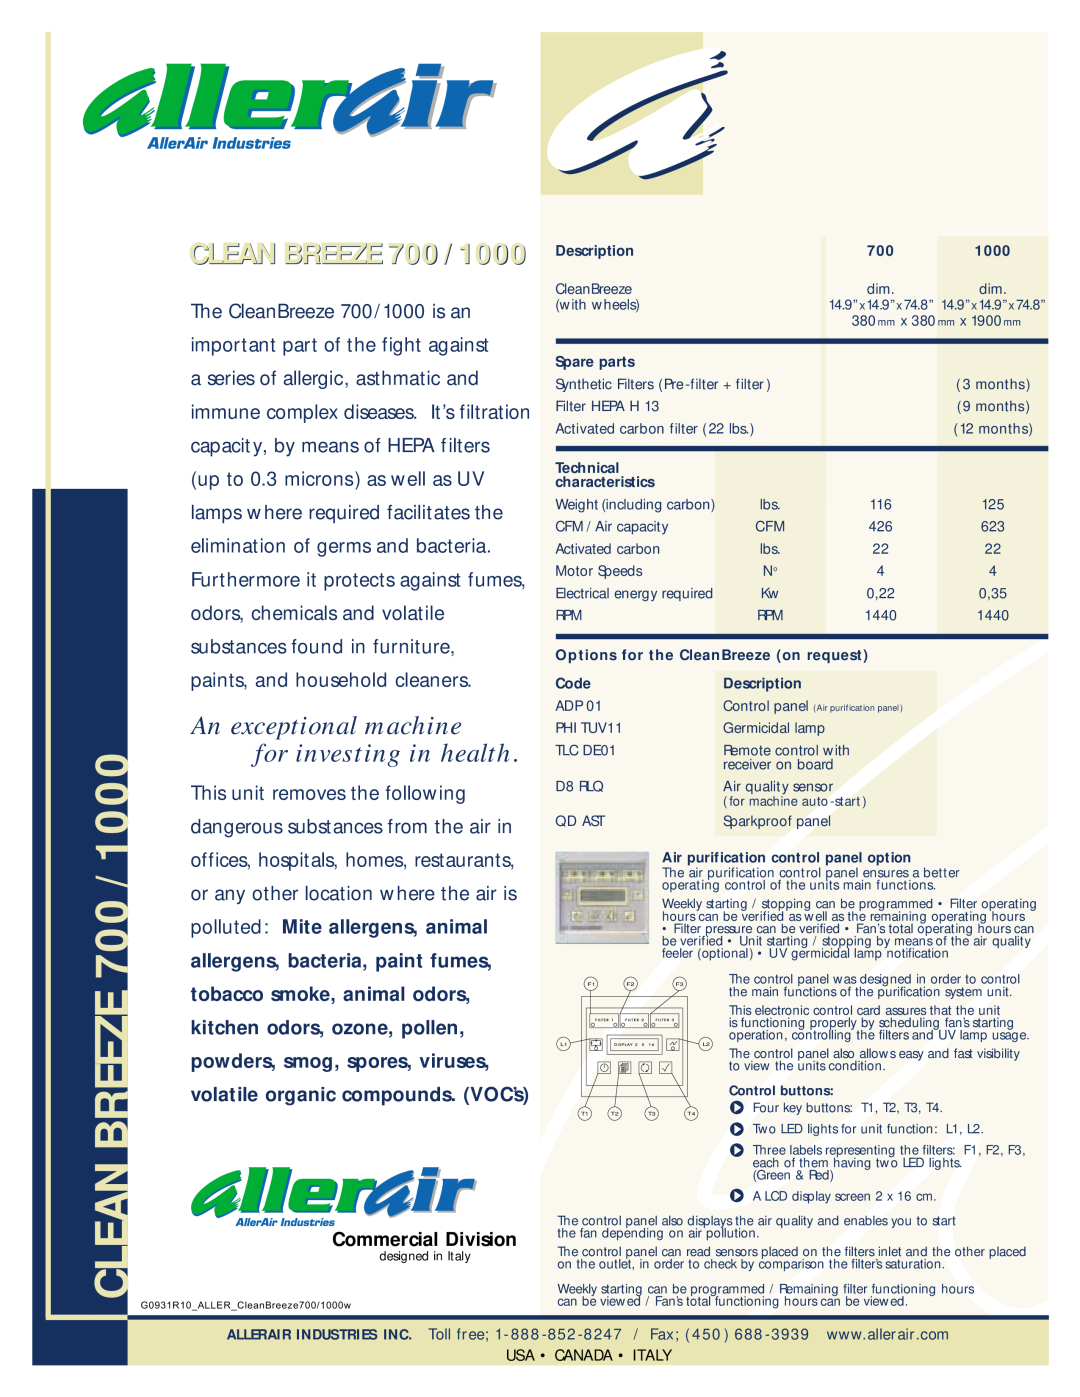 AllerAir manual Clean Breeze, CLEAN BREEZE 700/1000, An exceptional machine for investing in health 